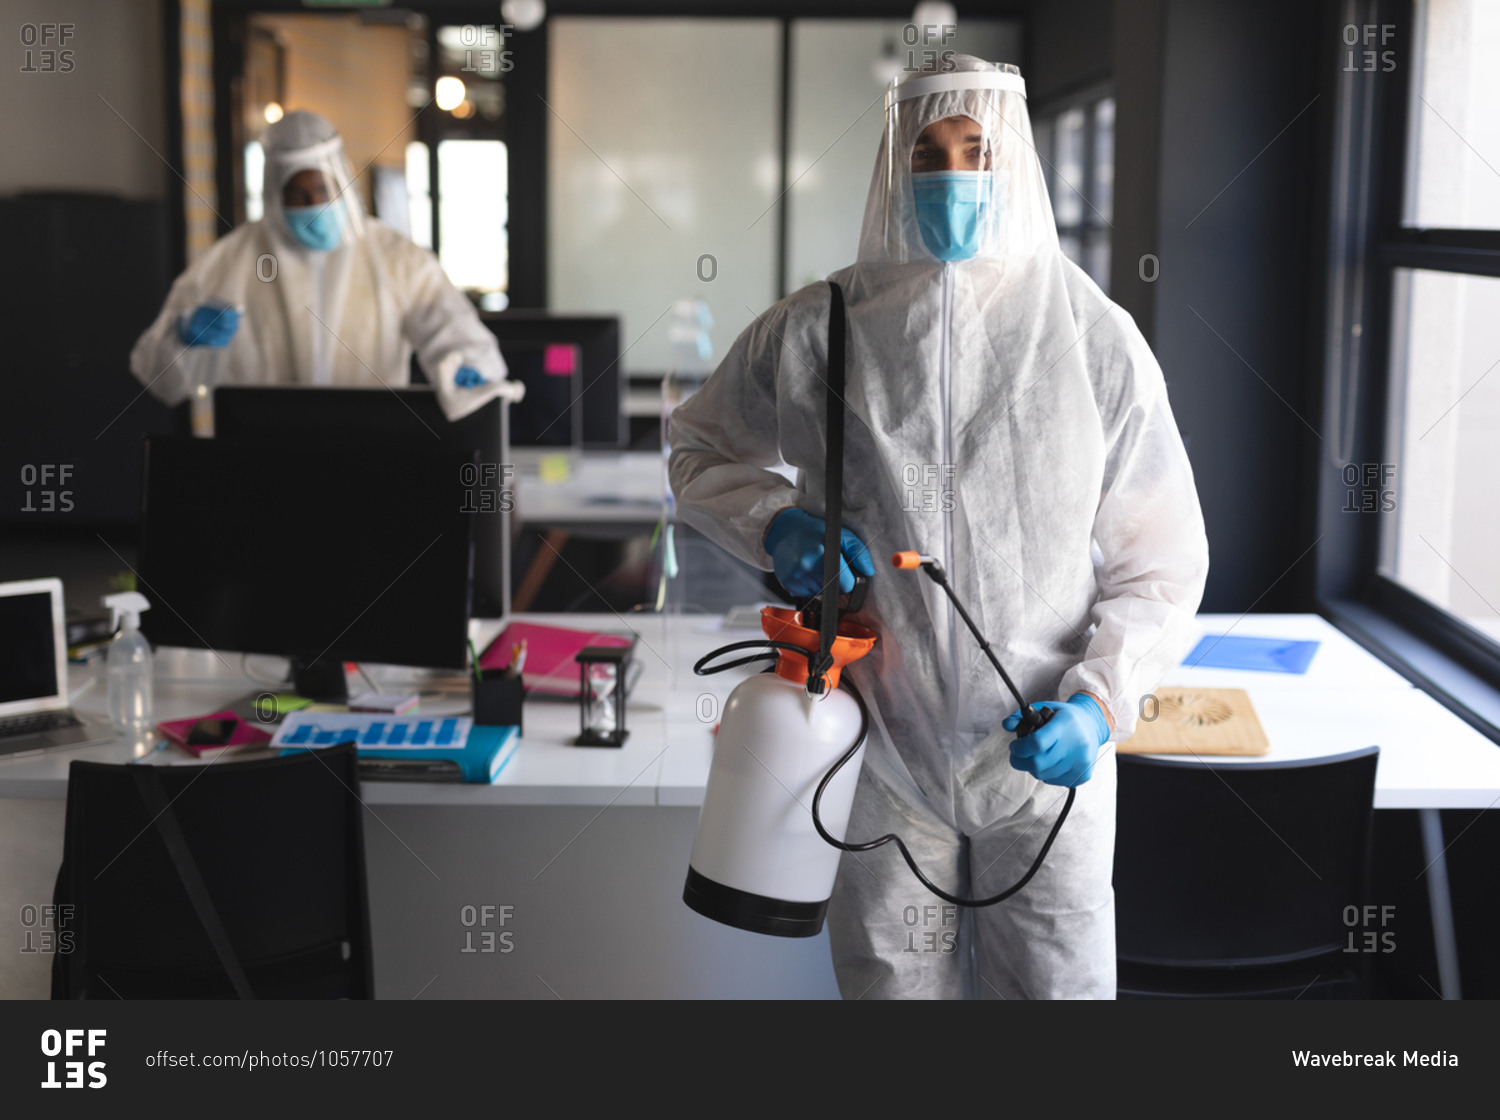 Portrait of male health worker at modern office. wearing face mask and protective clothes carrying disinfectant spray.